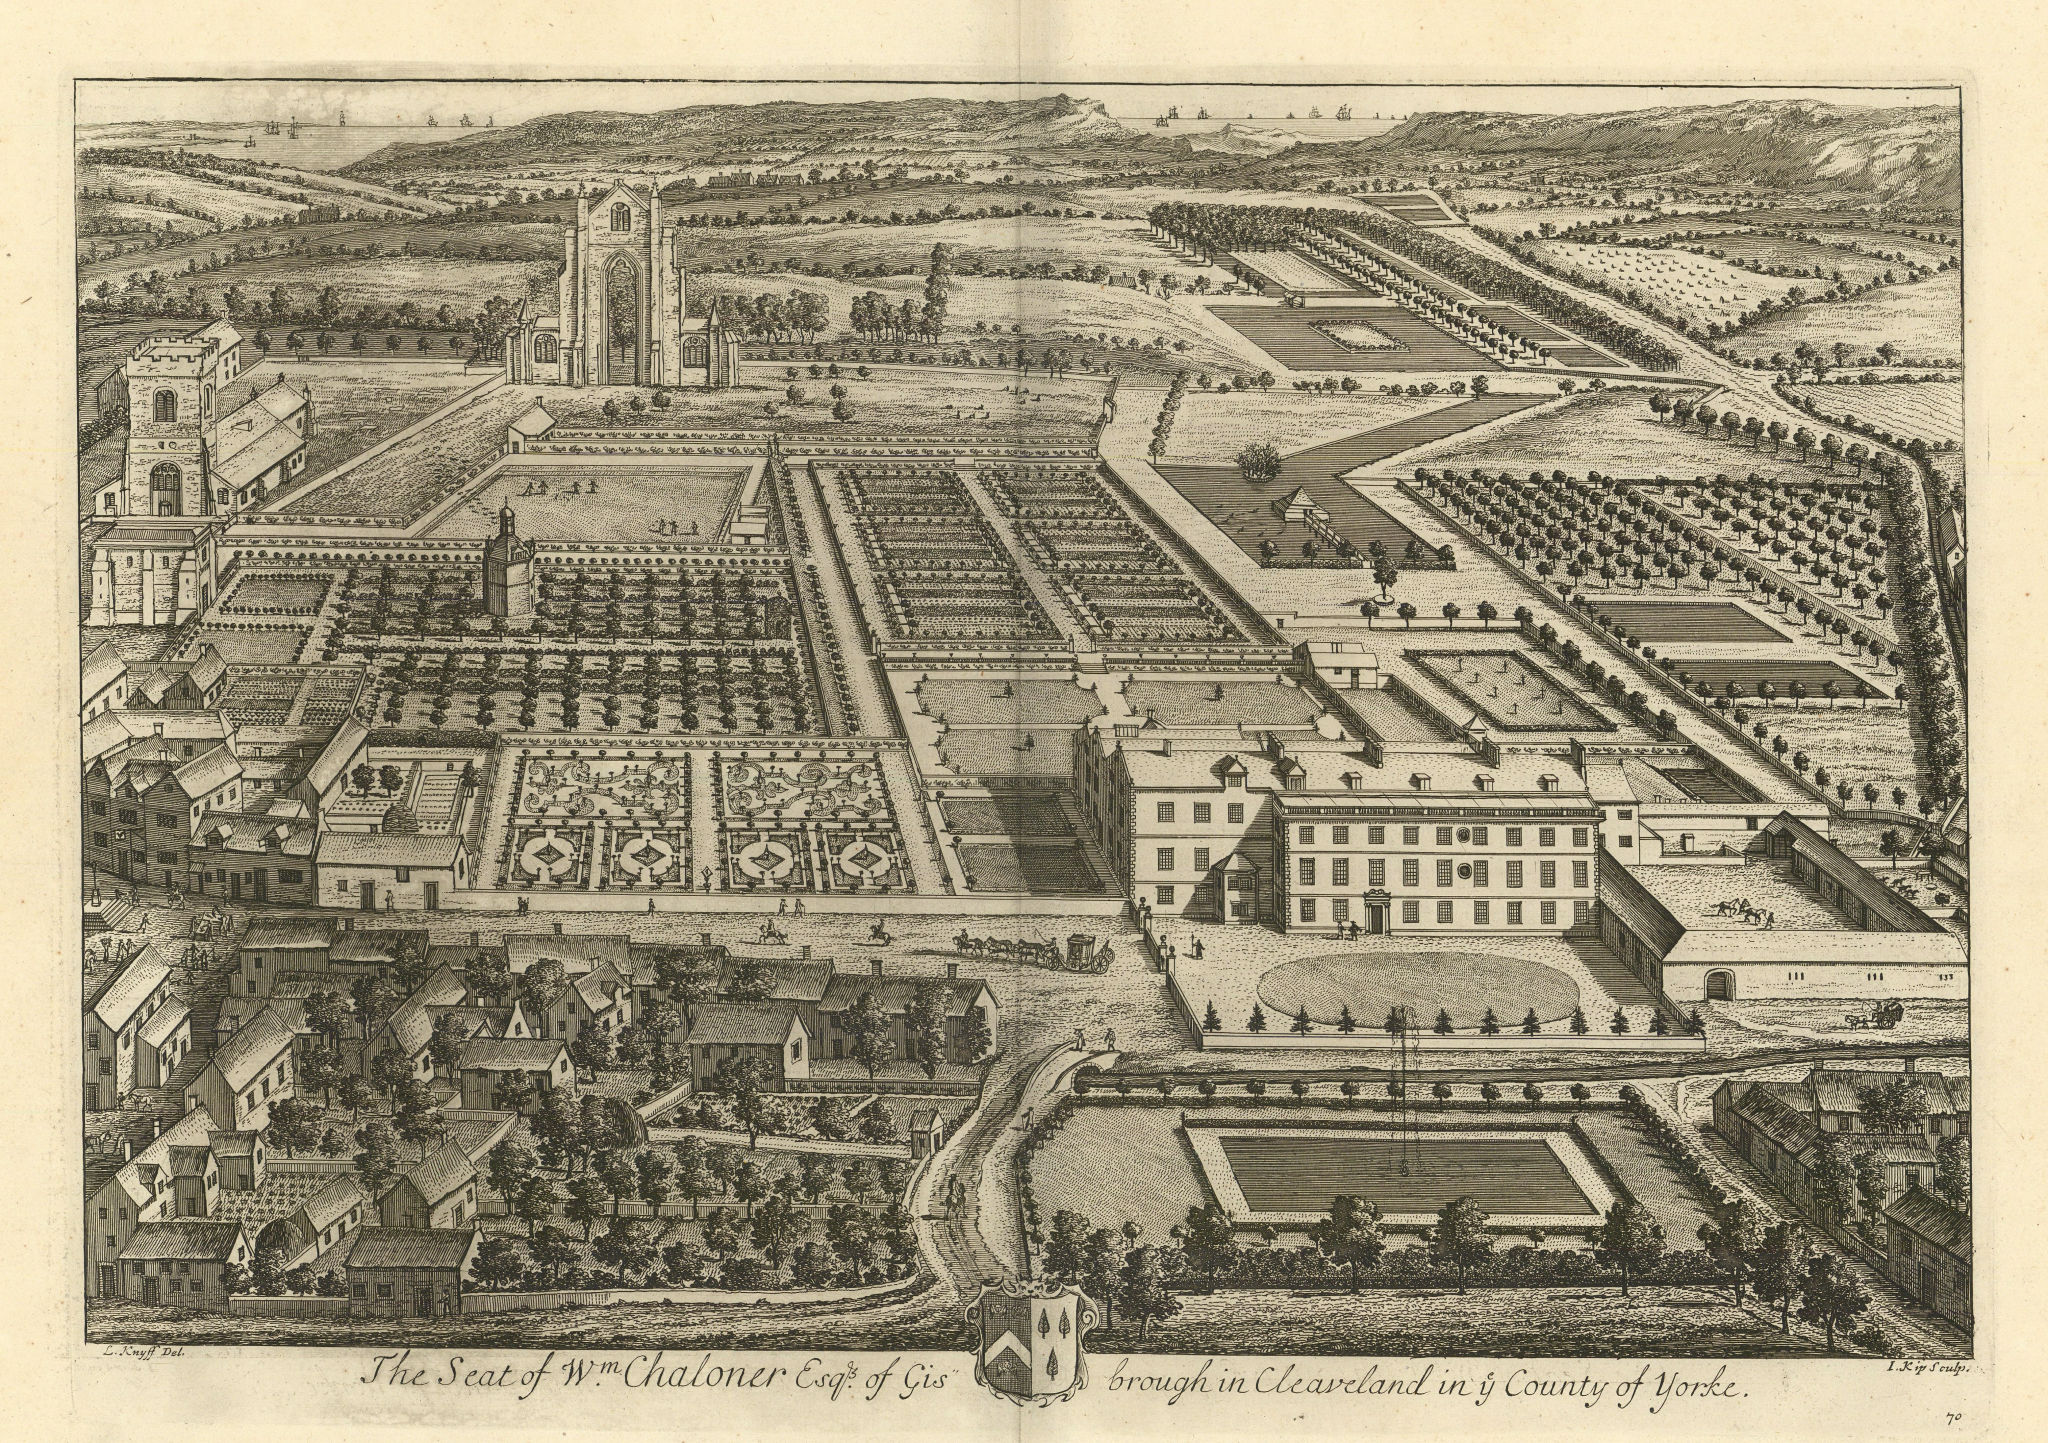 Associate Product Gisborough Hall & Priory, Cleveland by Kip/Knyff. "The Seat of Wm Chaloner" 1709